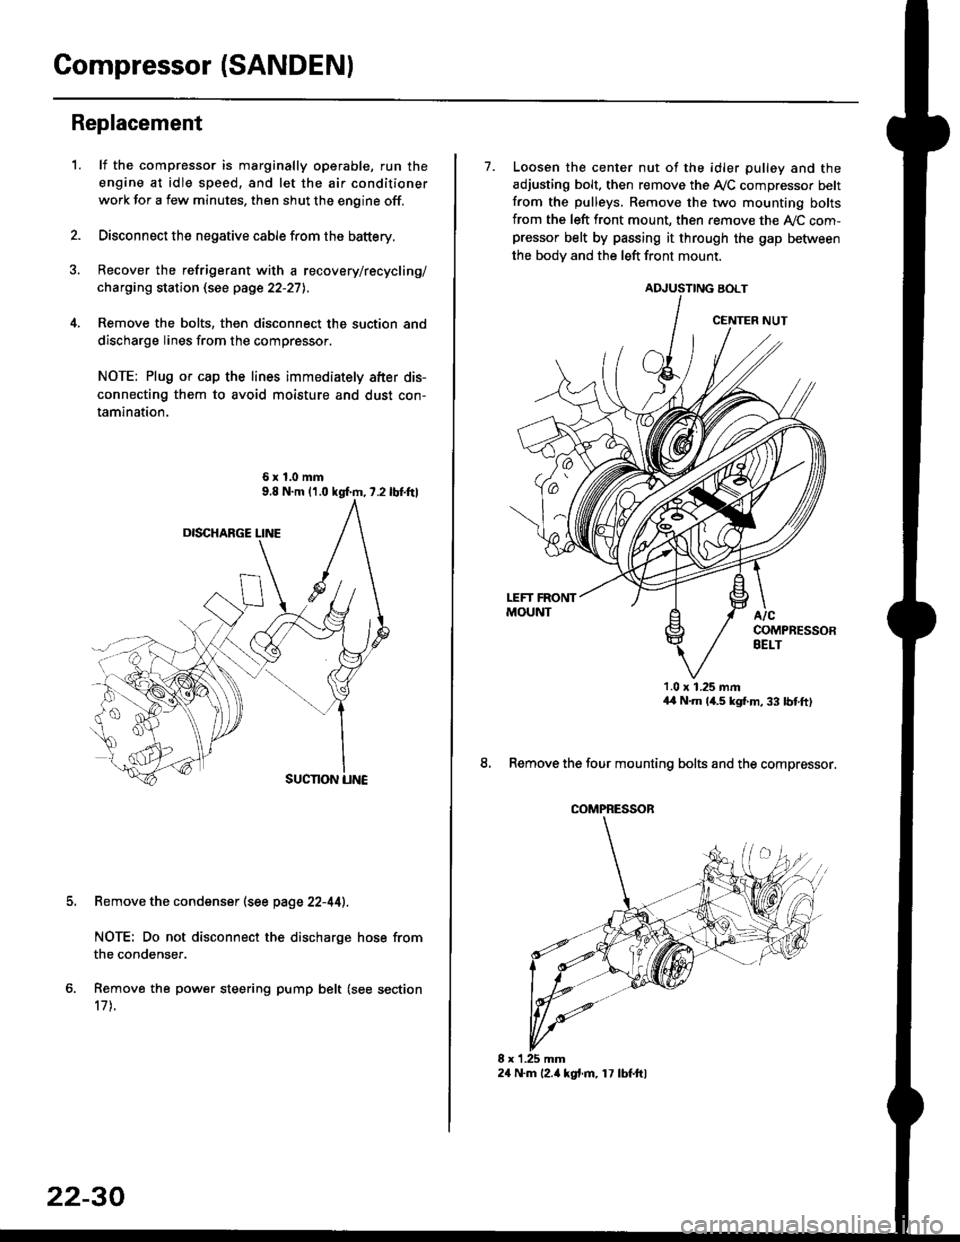 HONDA CIVIC 1996 6.G Service Manual Compressor (SANDENI
Replacement
1.lf the compressor is marginally operable, run the
engine at idle speed, and let the air conditioner
work for a few minutes. then shut the engine off.
Disconnect the n